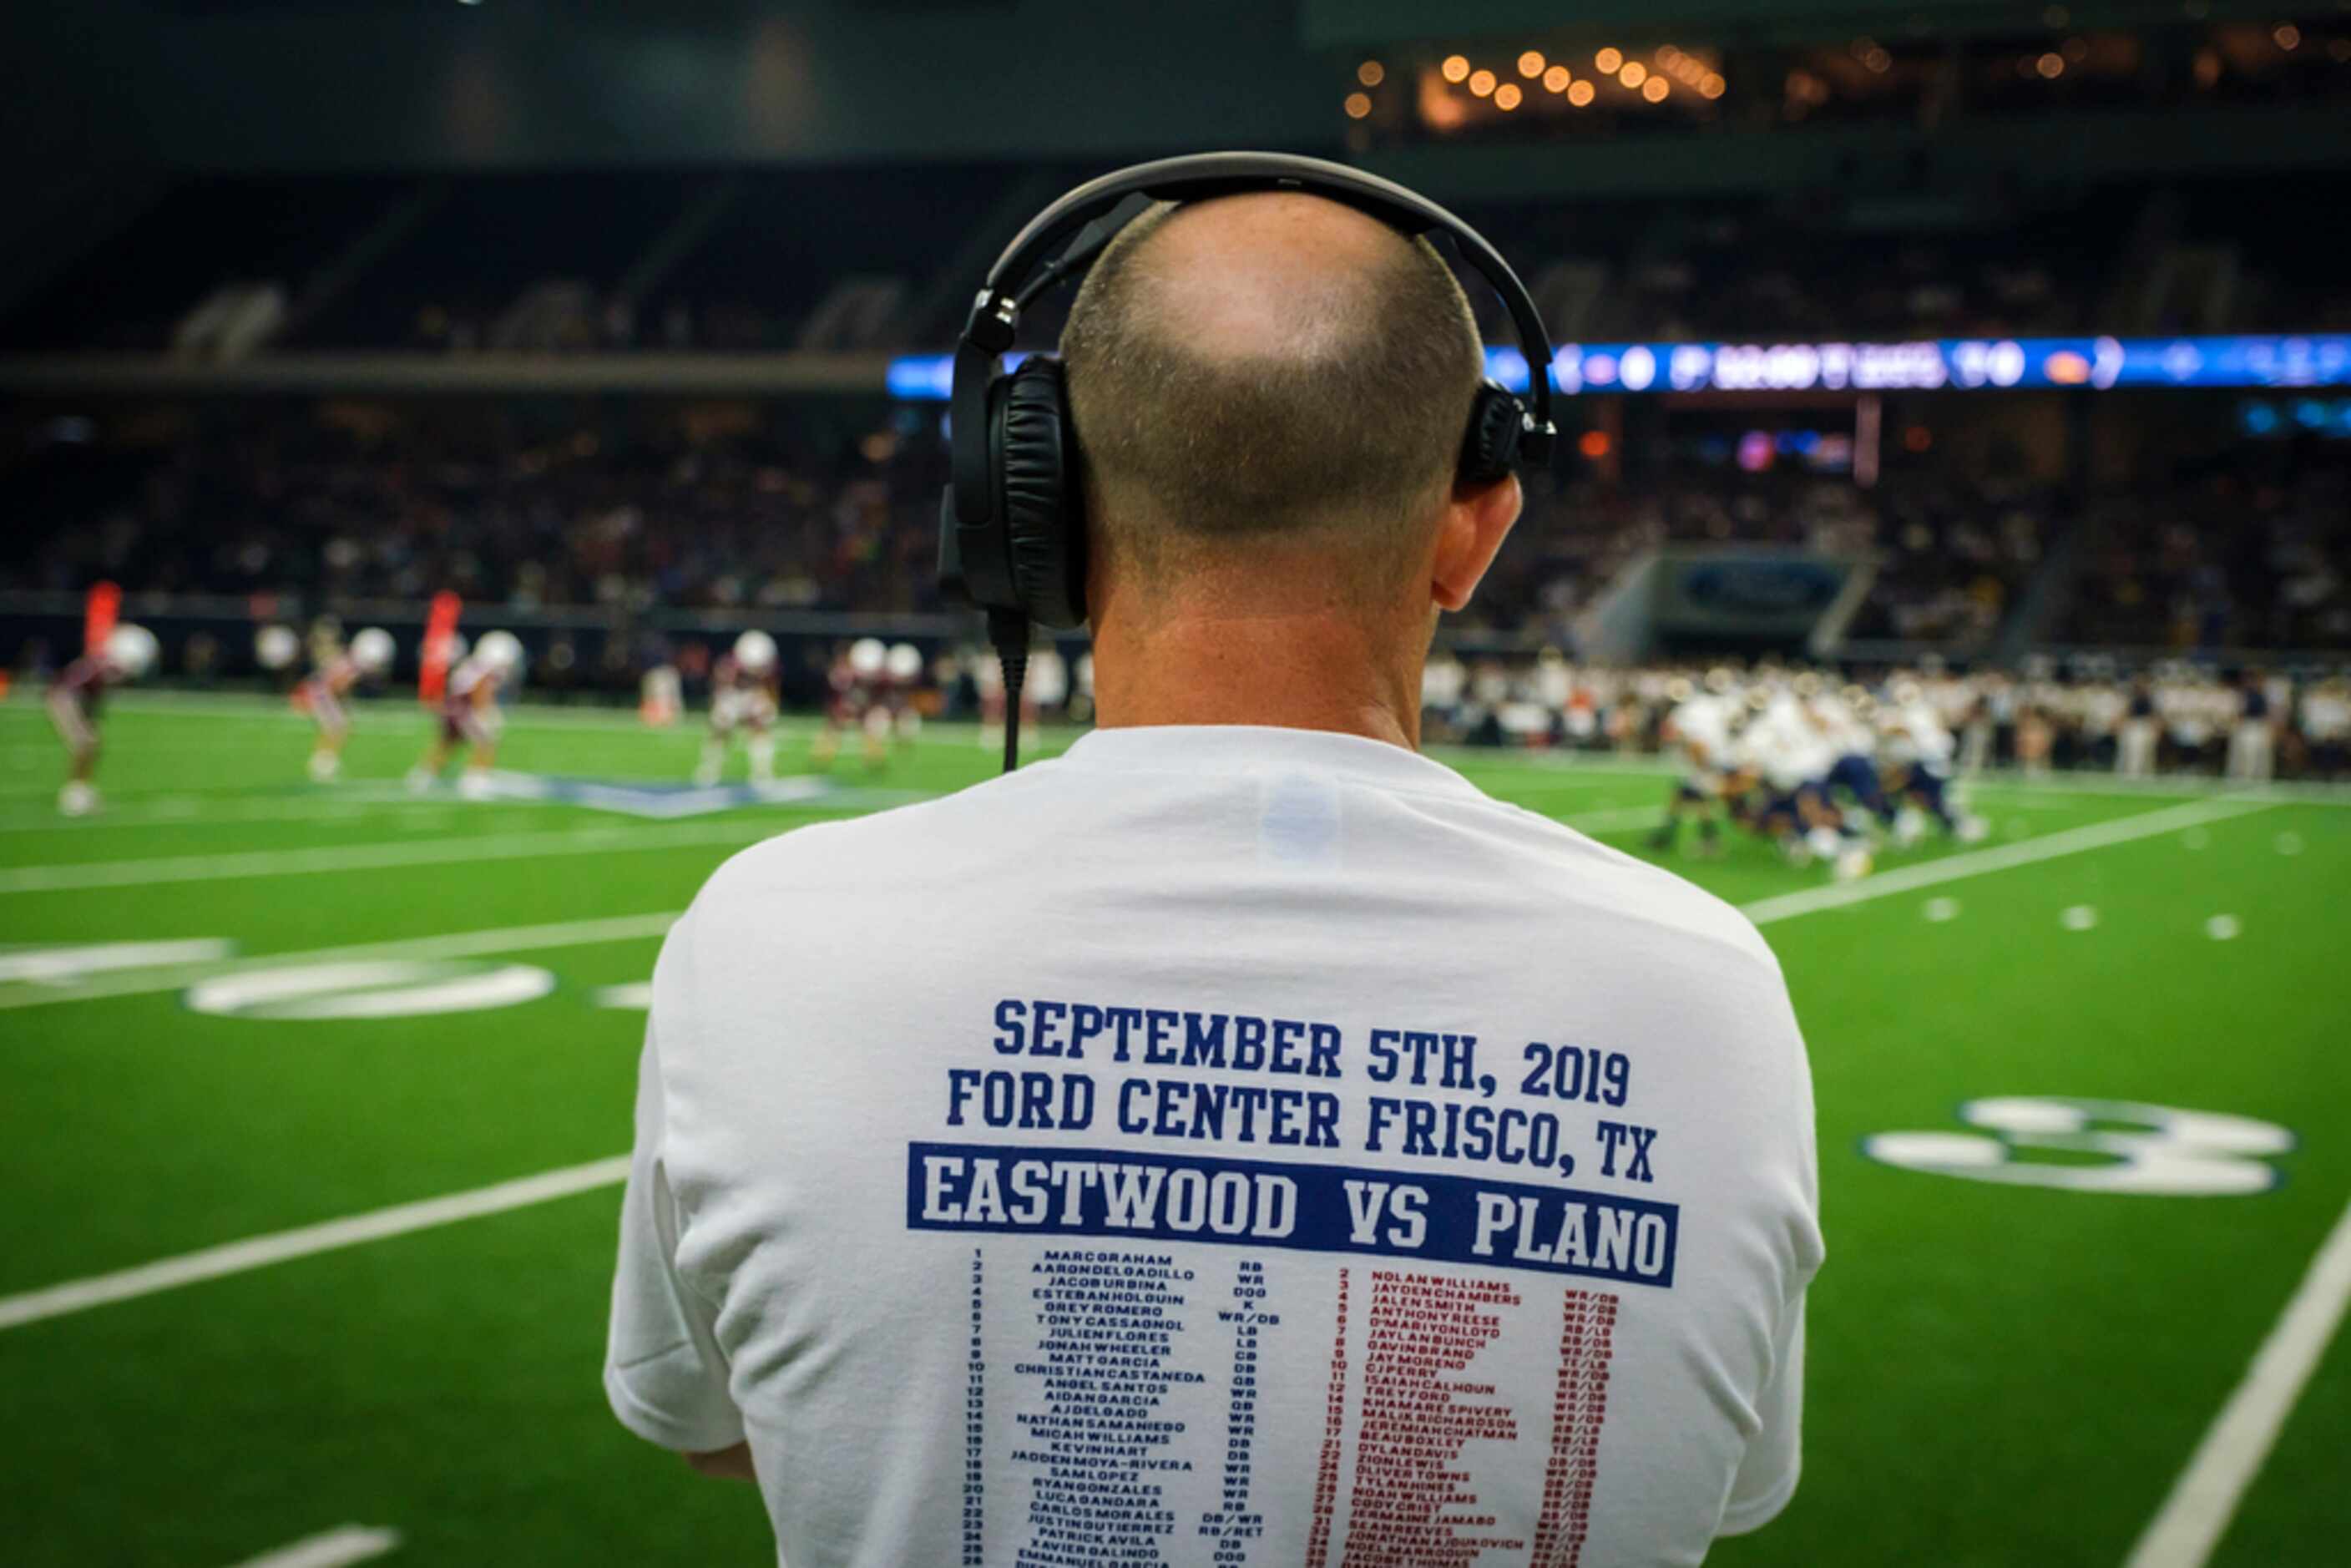 A Plano coach wears a t-shirt commemorating the game as the teamÃs kick off to start a high...